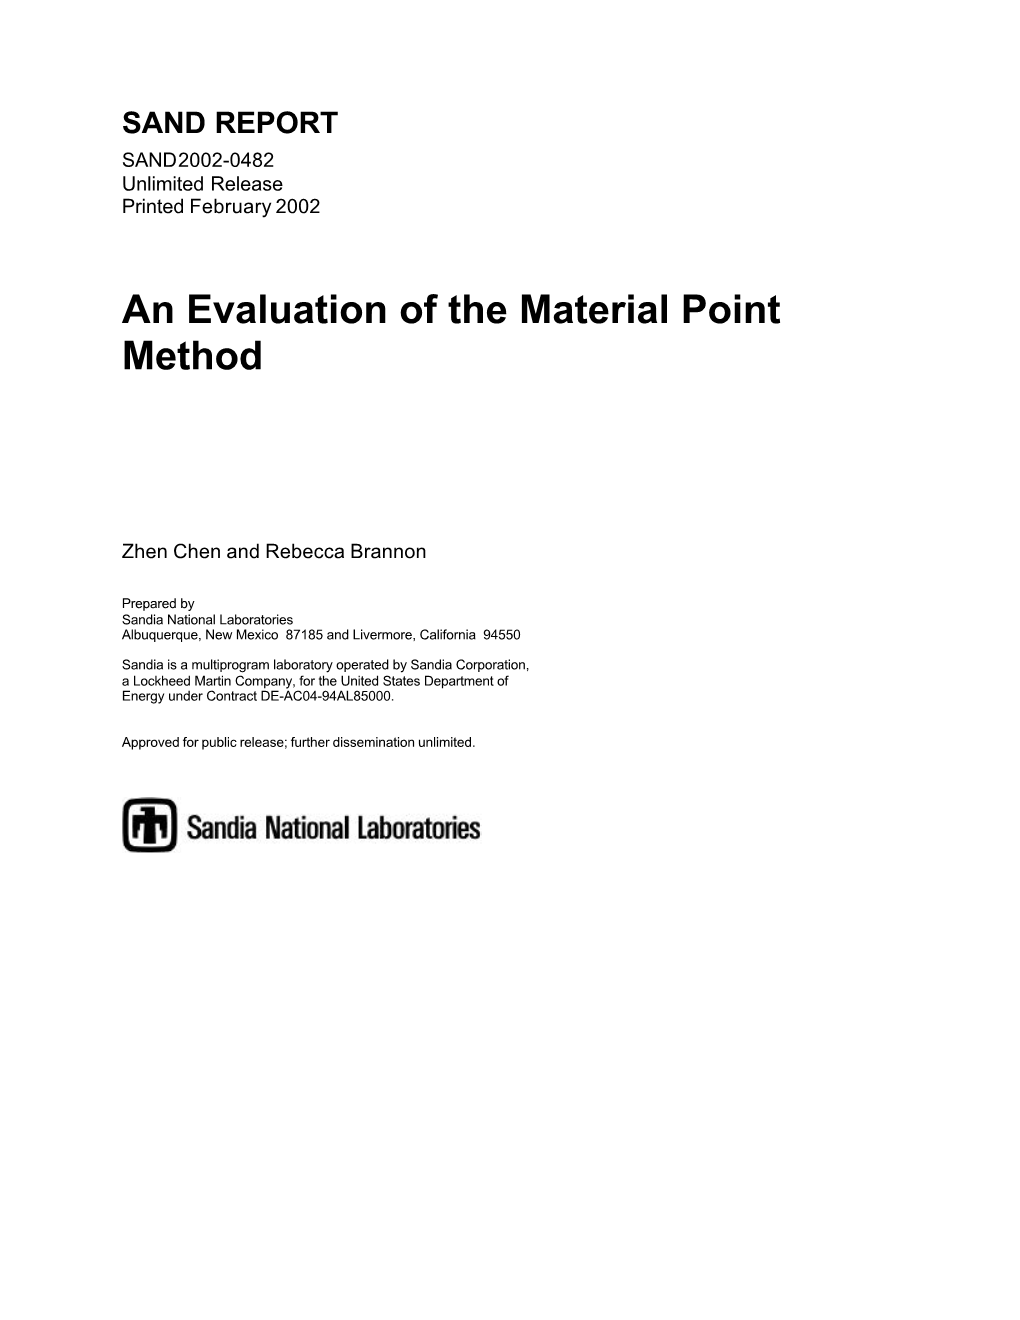 The Algorithm for the Material Point Method